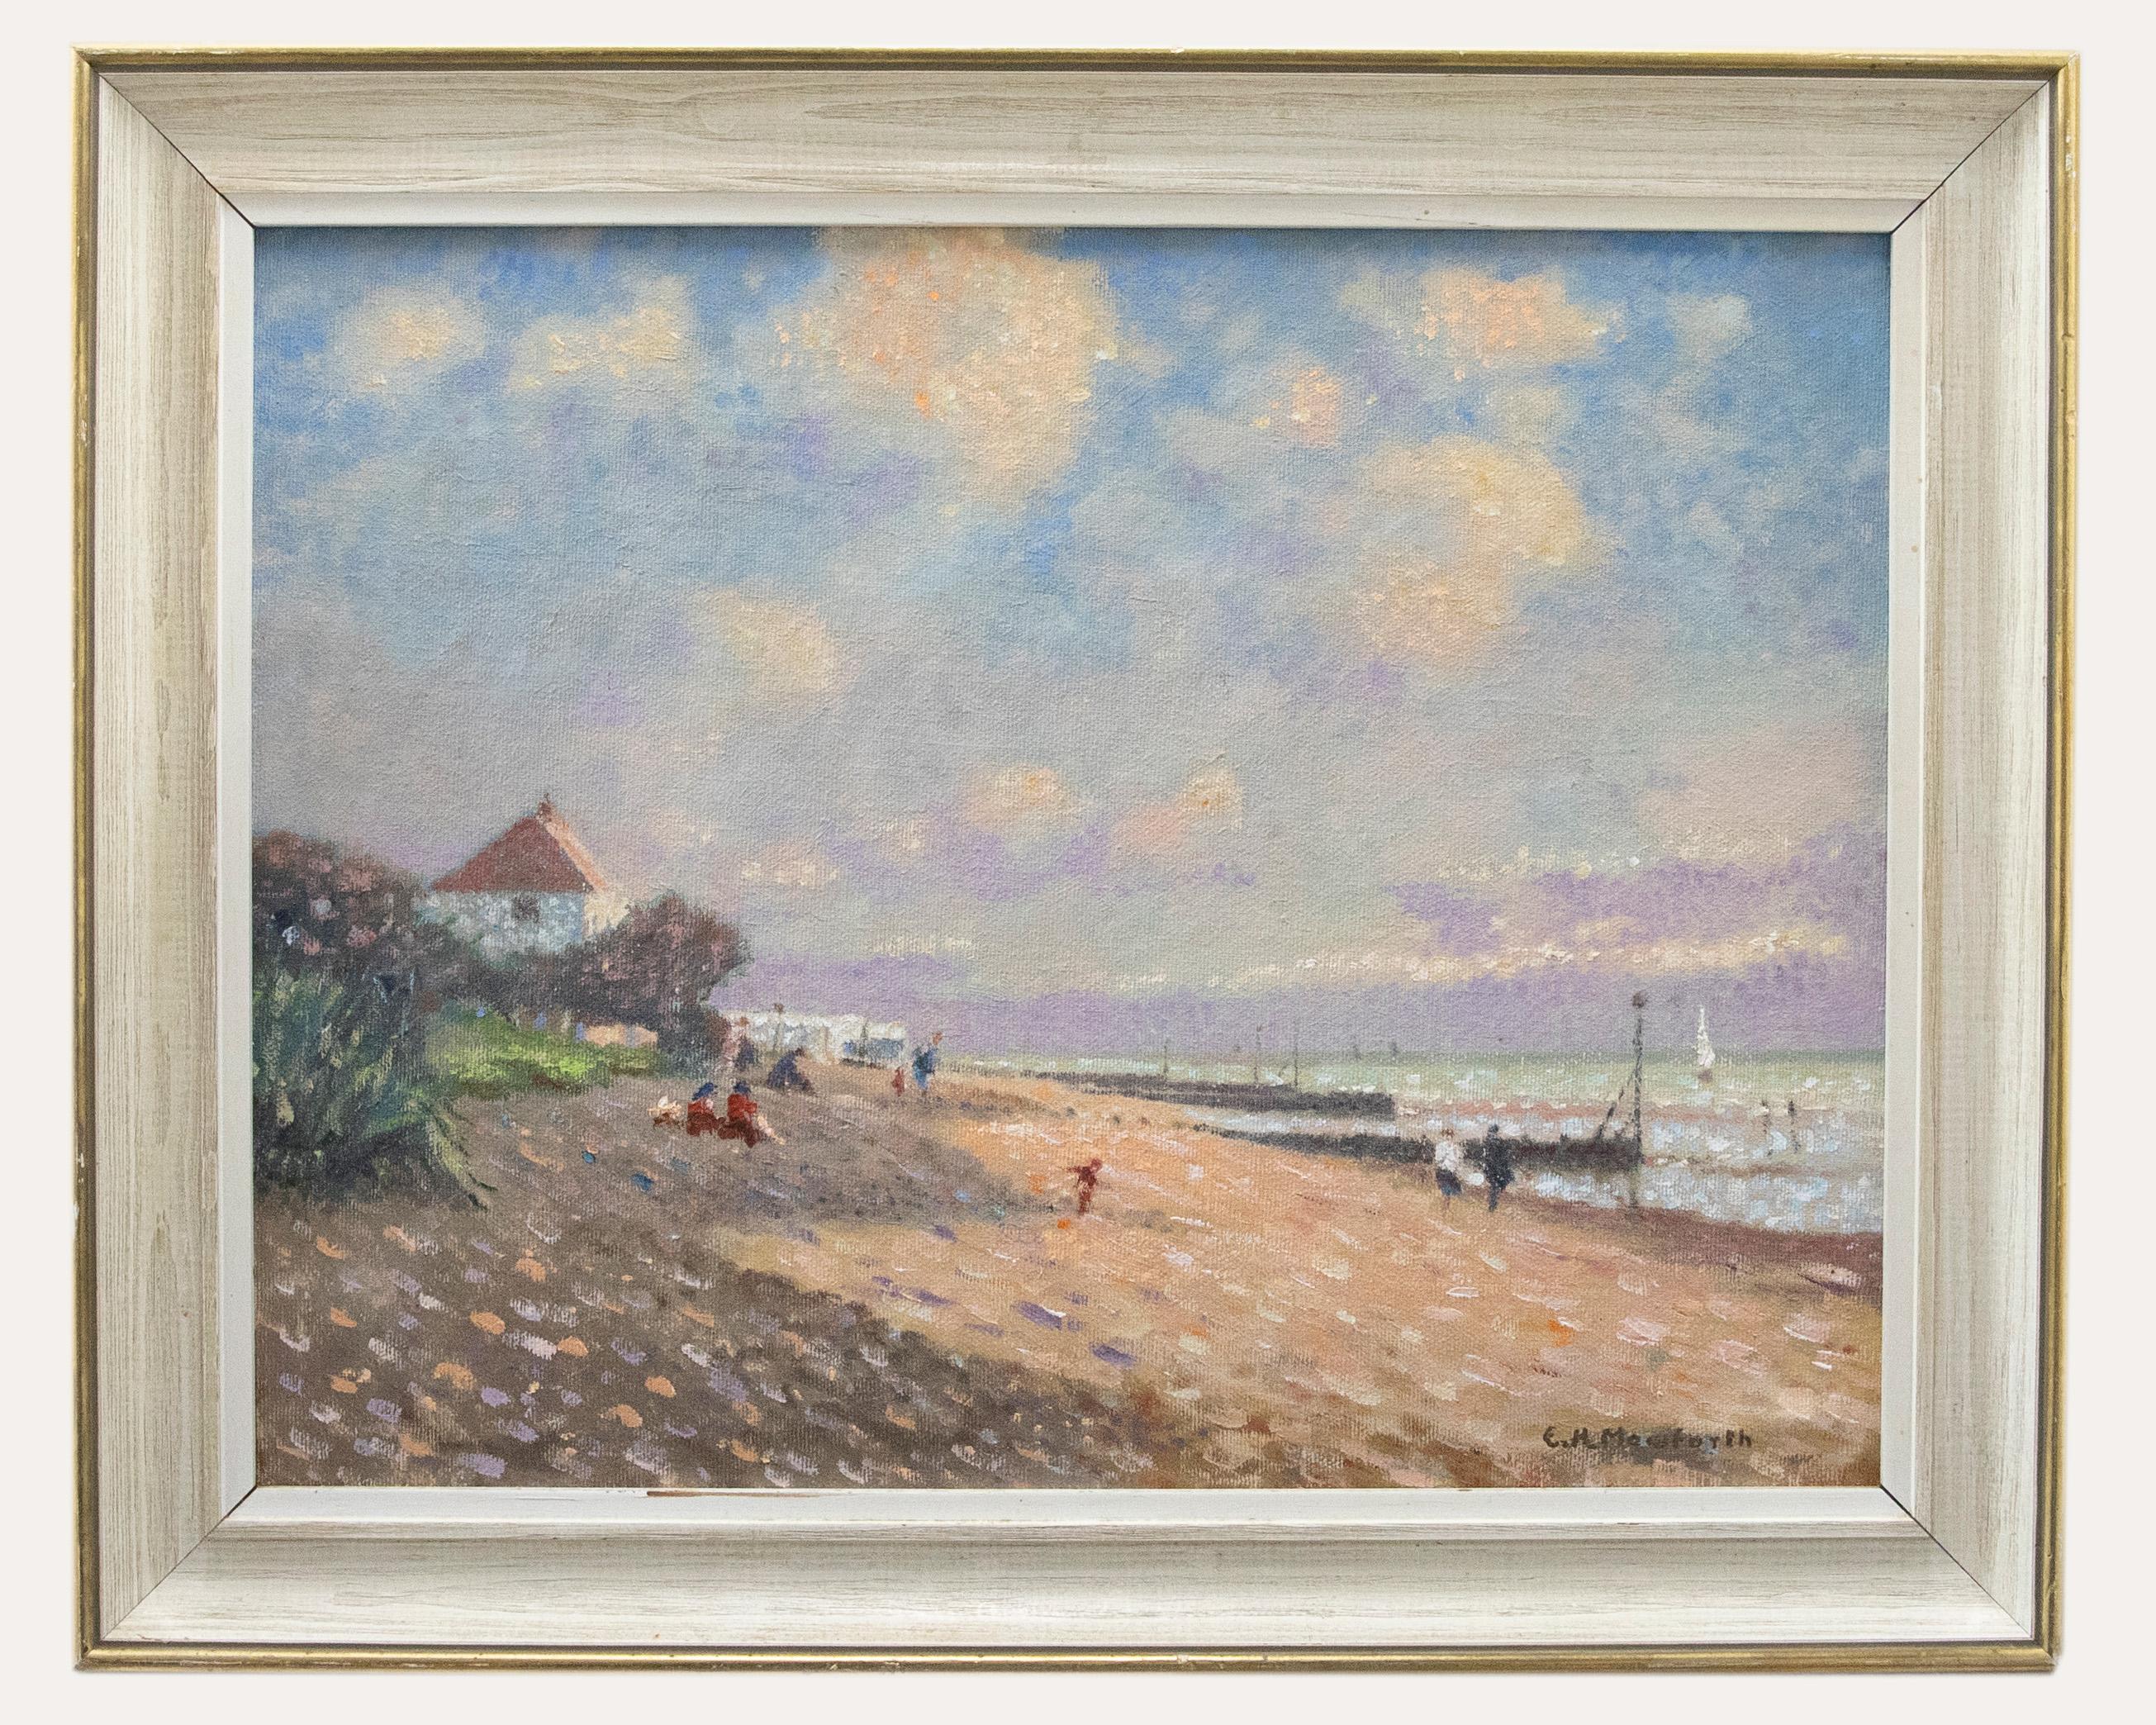 Unknown Figurative Painting - E .H. Mowforth - Framed 20th Century Oil, Figures at the Beach